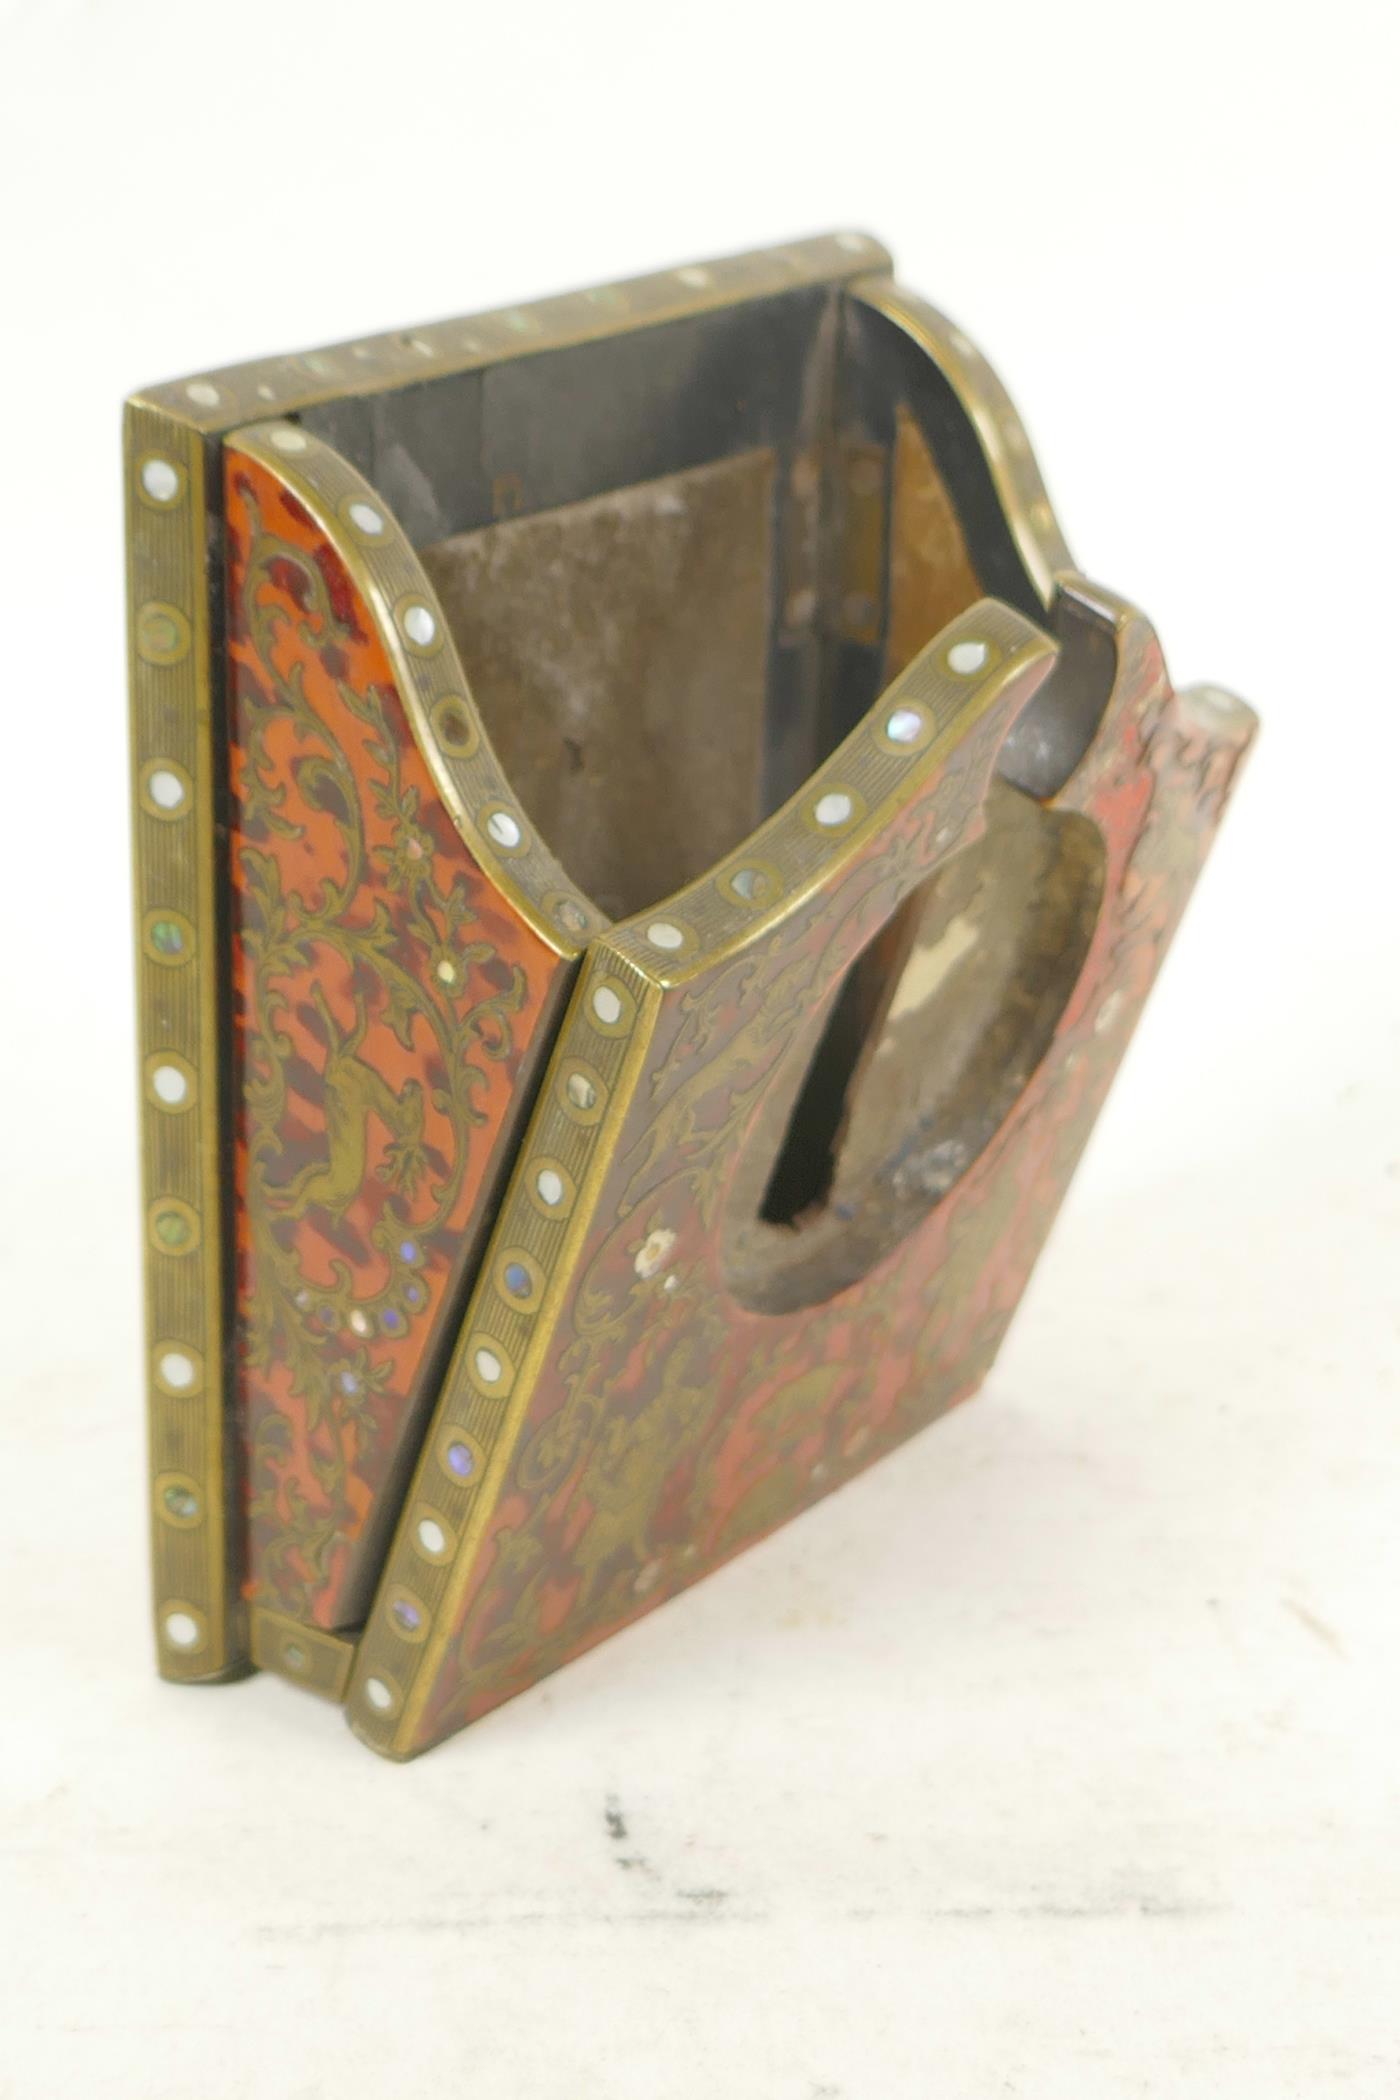 A C19th boulework folding watch holder with brass inlay of figures and animals, 5" x 4" - Image 3 of 4